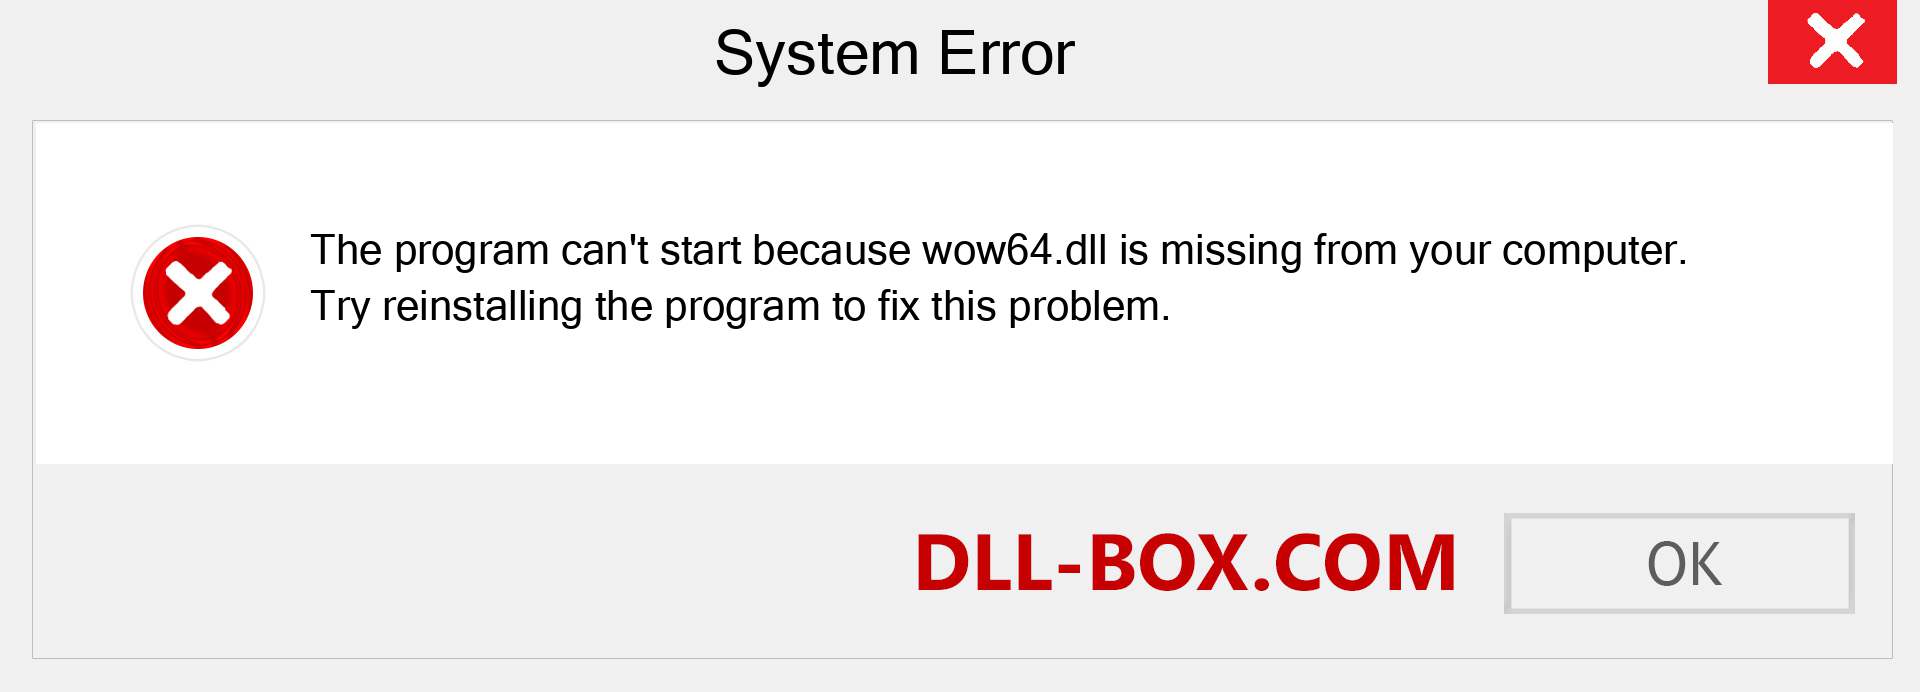  wow64.dll file is missing?. Download for Windows 7, 8, 10 - Fix  wow64 dll Missing Error on Windows, photos, images